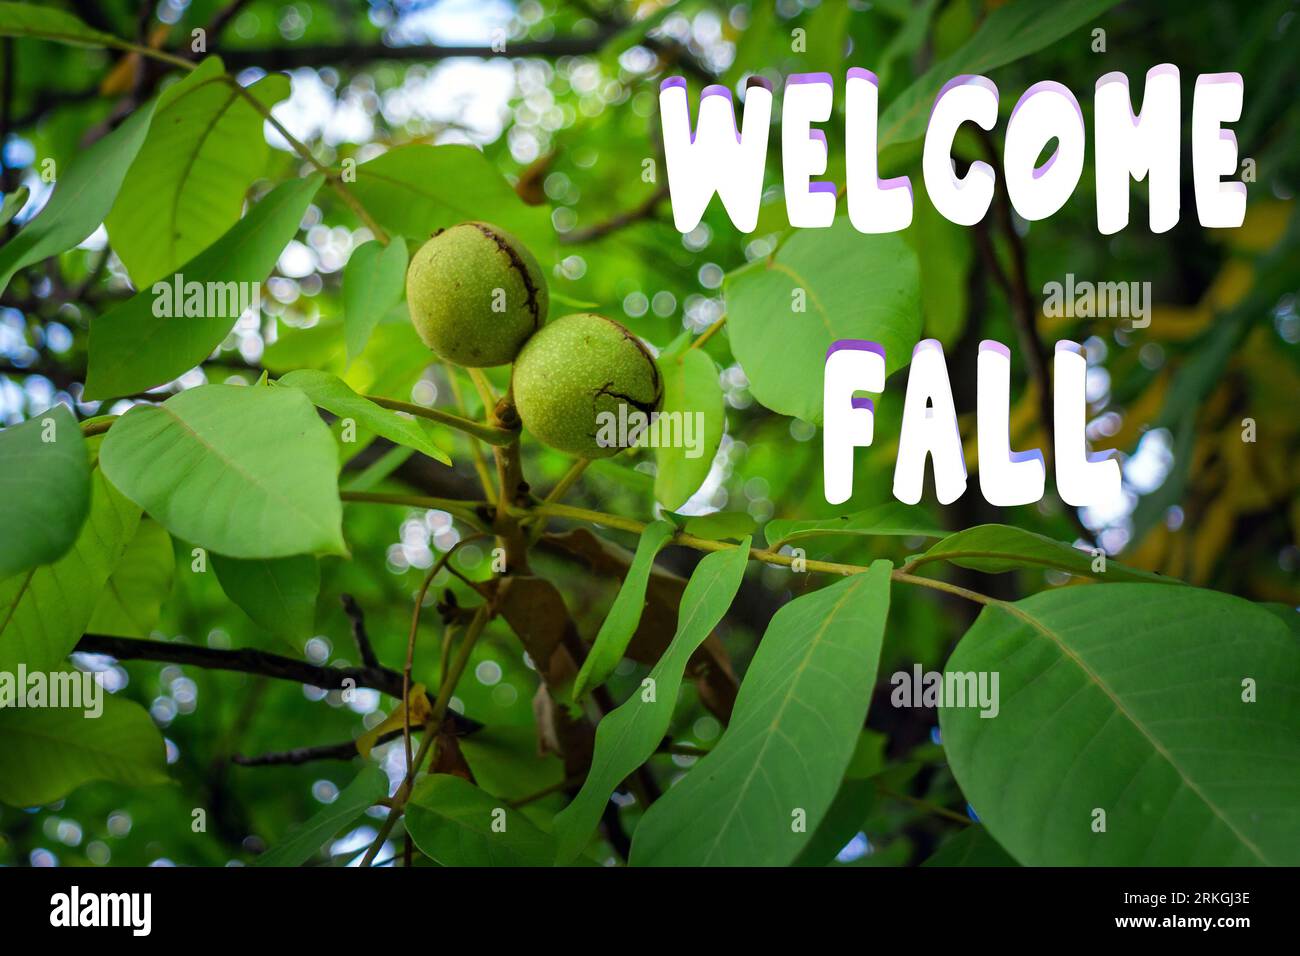 Welcome fall lettering inscription. Walnut on a tree. the cultivation of nuts. Green leaves and an unripe nut. Stock Photo